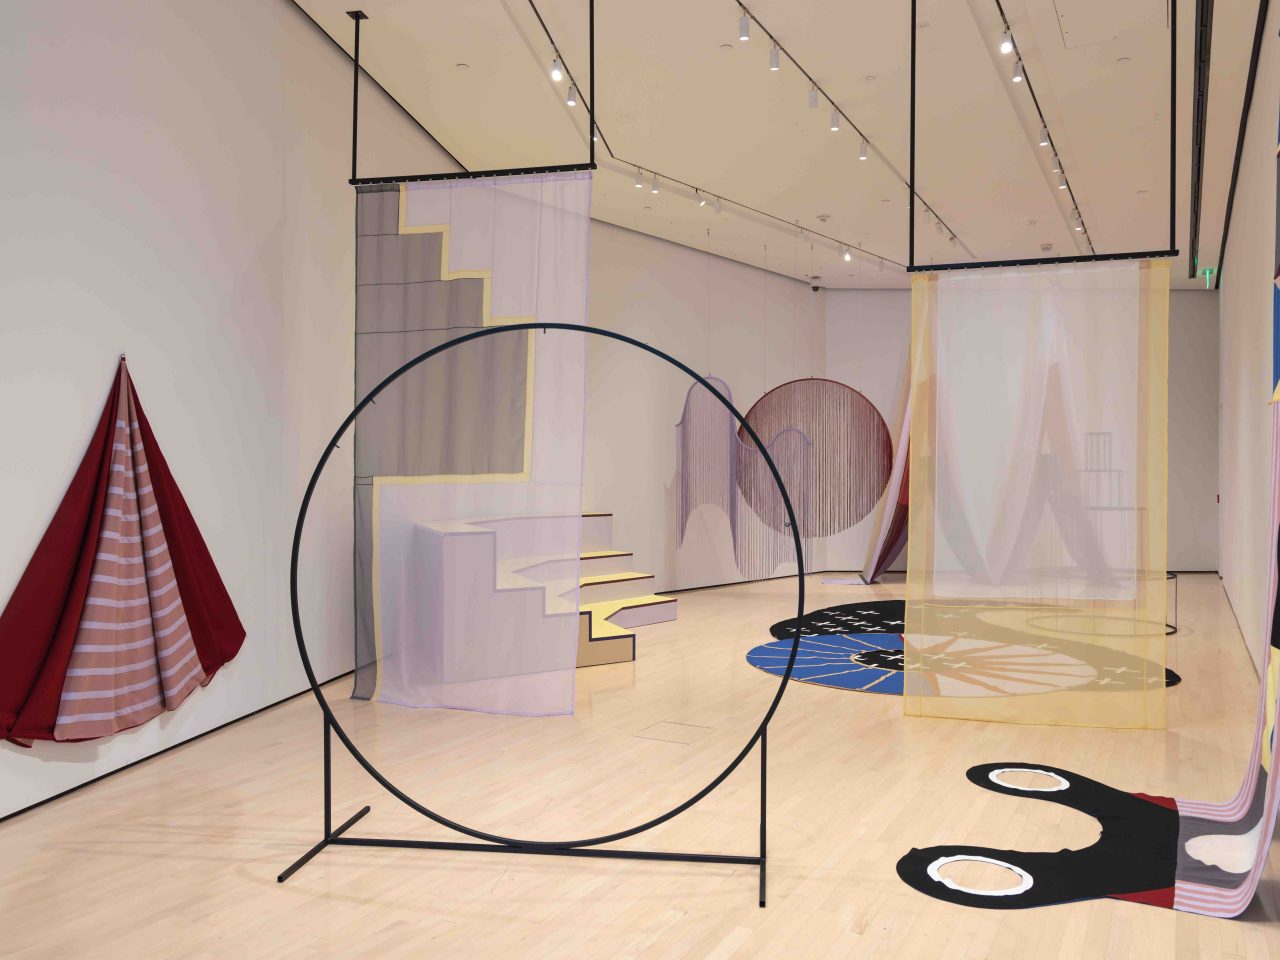 Andrea Canepa: As we dwell in the fold installation view